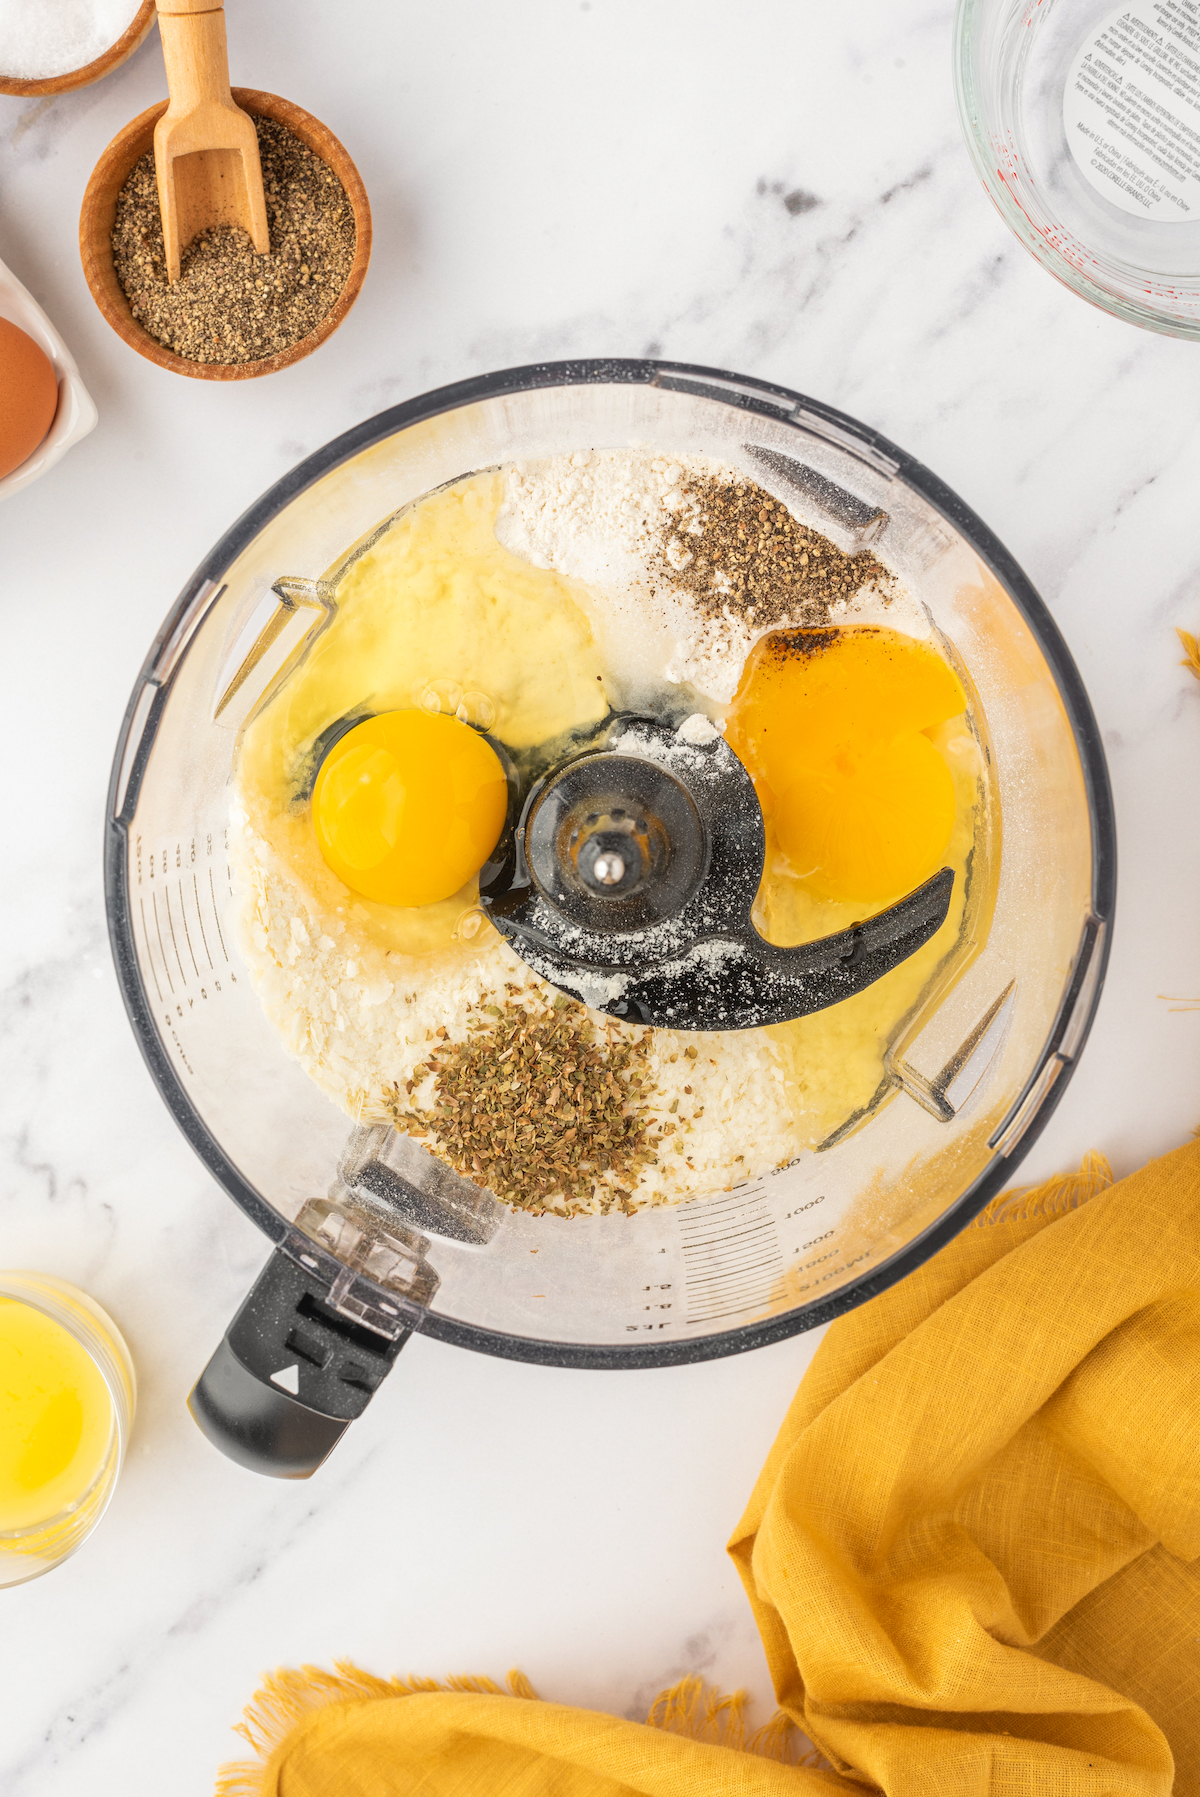 Eggs, flour, and other ingredients in a food processor.